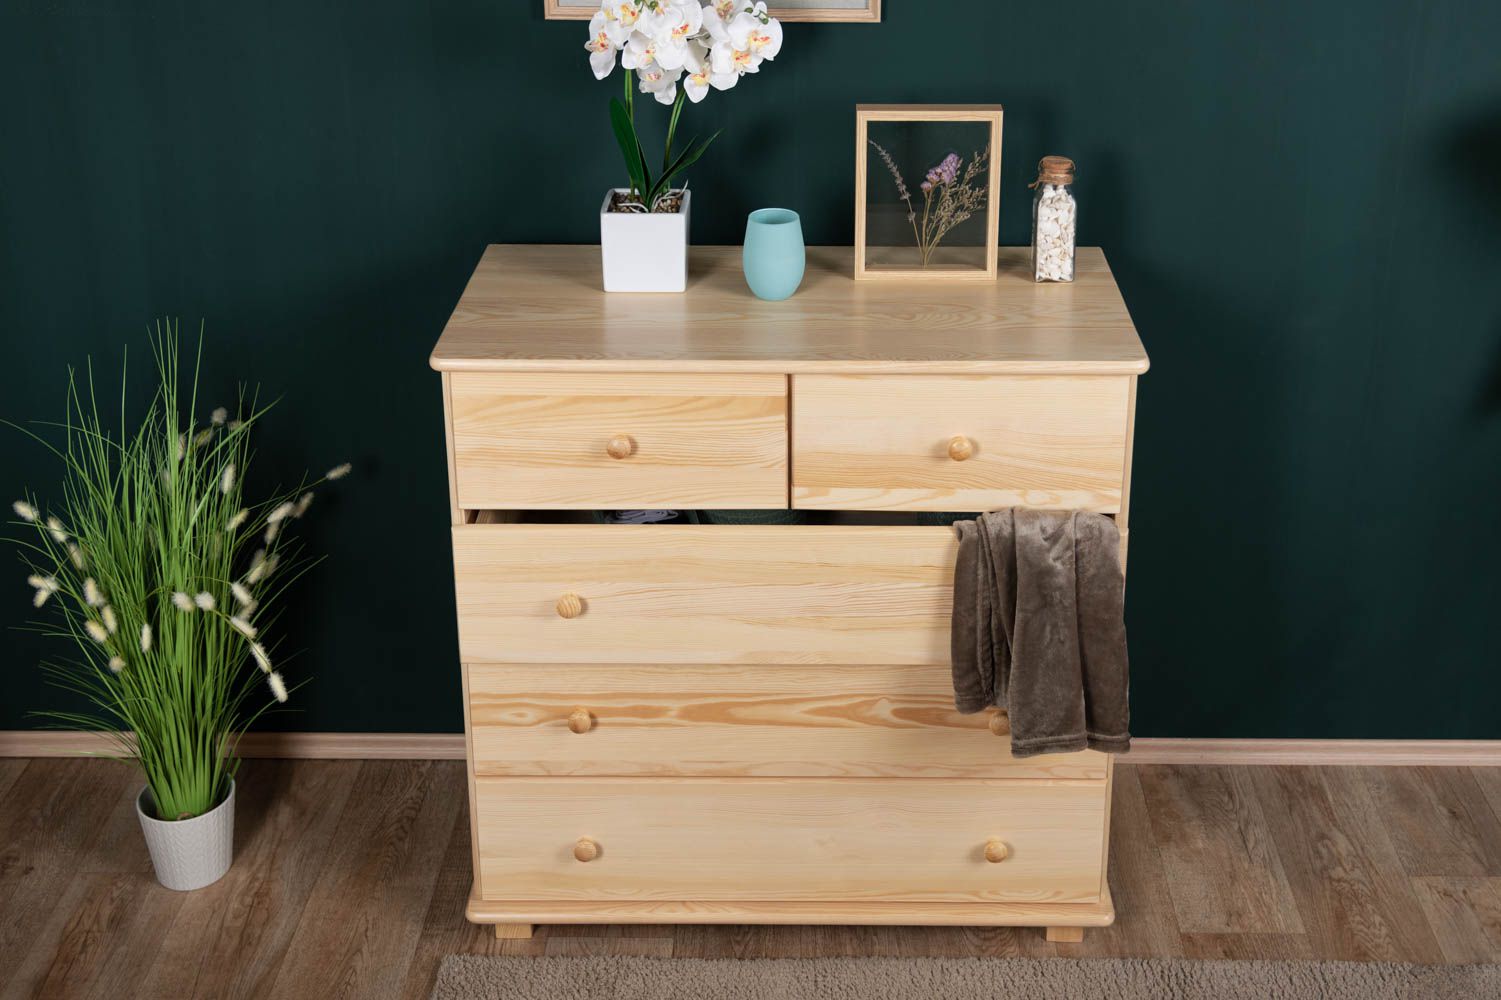 Chest of drawers solid pine solid wood natural 021 - Dimensions 100 x 100 x 47 cm (H x W x D)